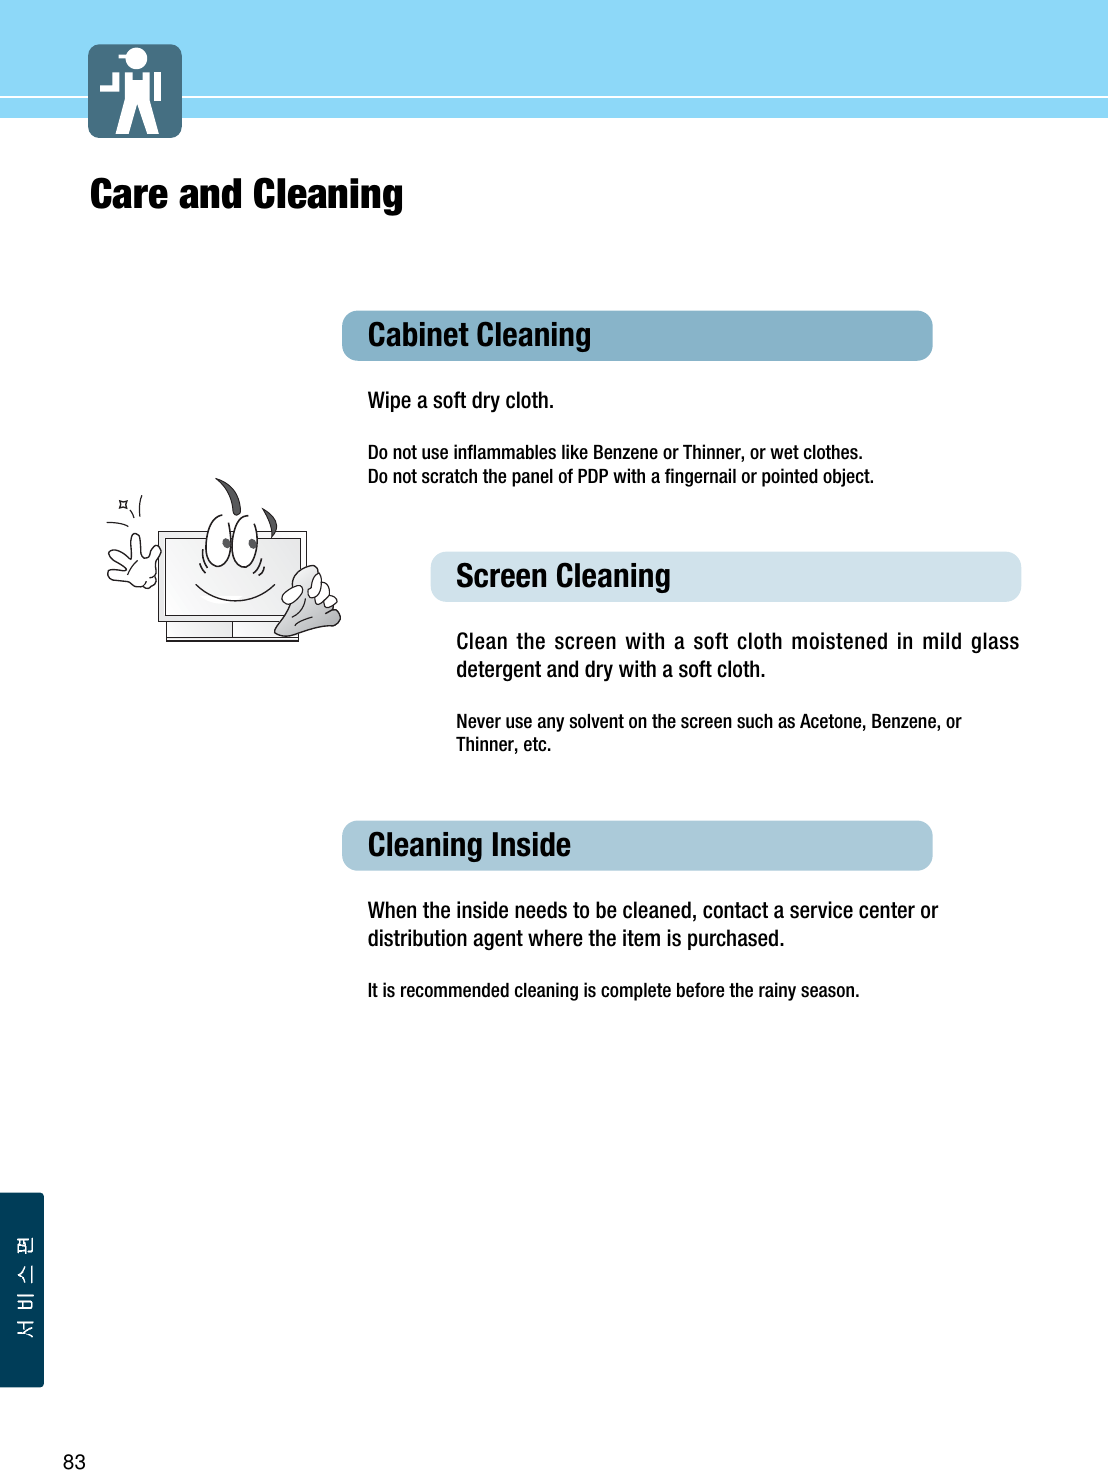 83Care and CleaningCabinet Cleaning Wipe a soft dry cloth. Do not use inflammables like Benzene or Thinner, or wet clothes. Do not scratch the panel of PDP with a fingernail or pointed object. Screen Cleaning Clean the screen with a soft cloth moistened in mild glassdetergent and dry with a soft cloth.Never use any solvent on the screen such as Acetone, Benzene, orThinner, etc.Cleaning InsideWhen the inside needs to be cleaned, contact a service center ordistribution agent where the item is purchased.  It is recommended cleaning is complete before the rainy season. 